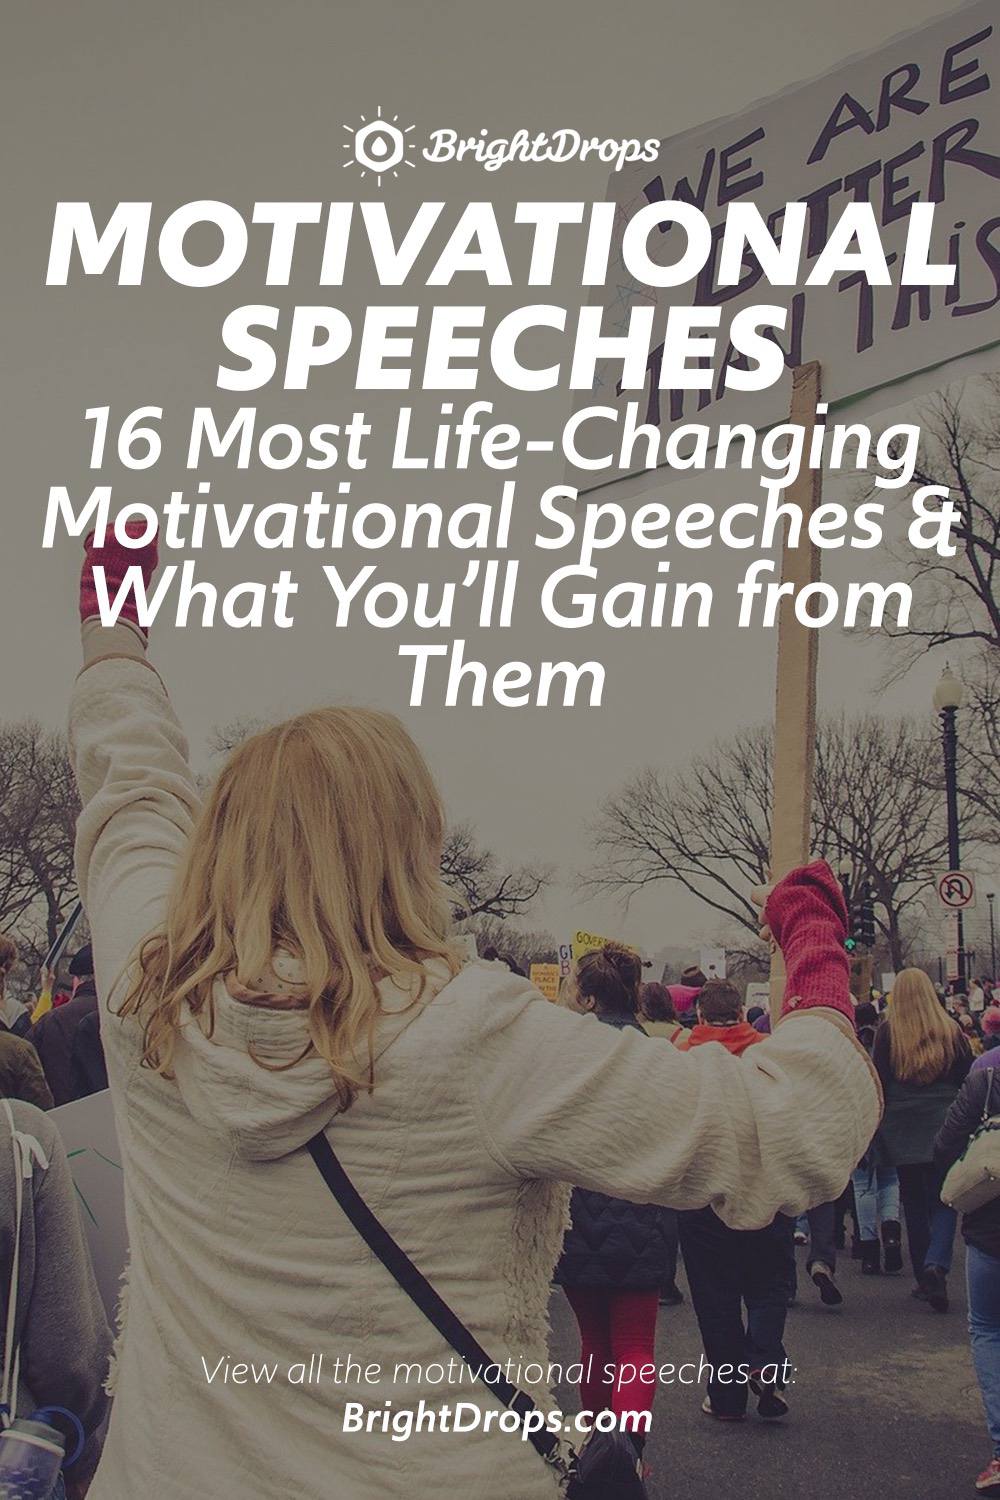 16 Most Life-Changing Motivational Speeches and What You’ll Gain From Them